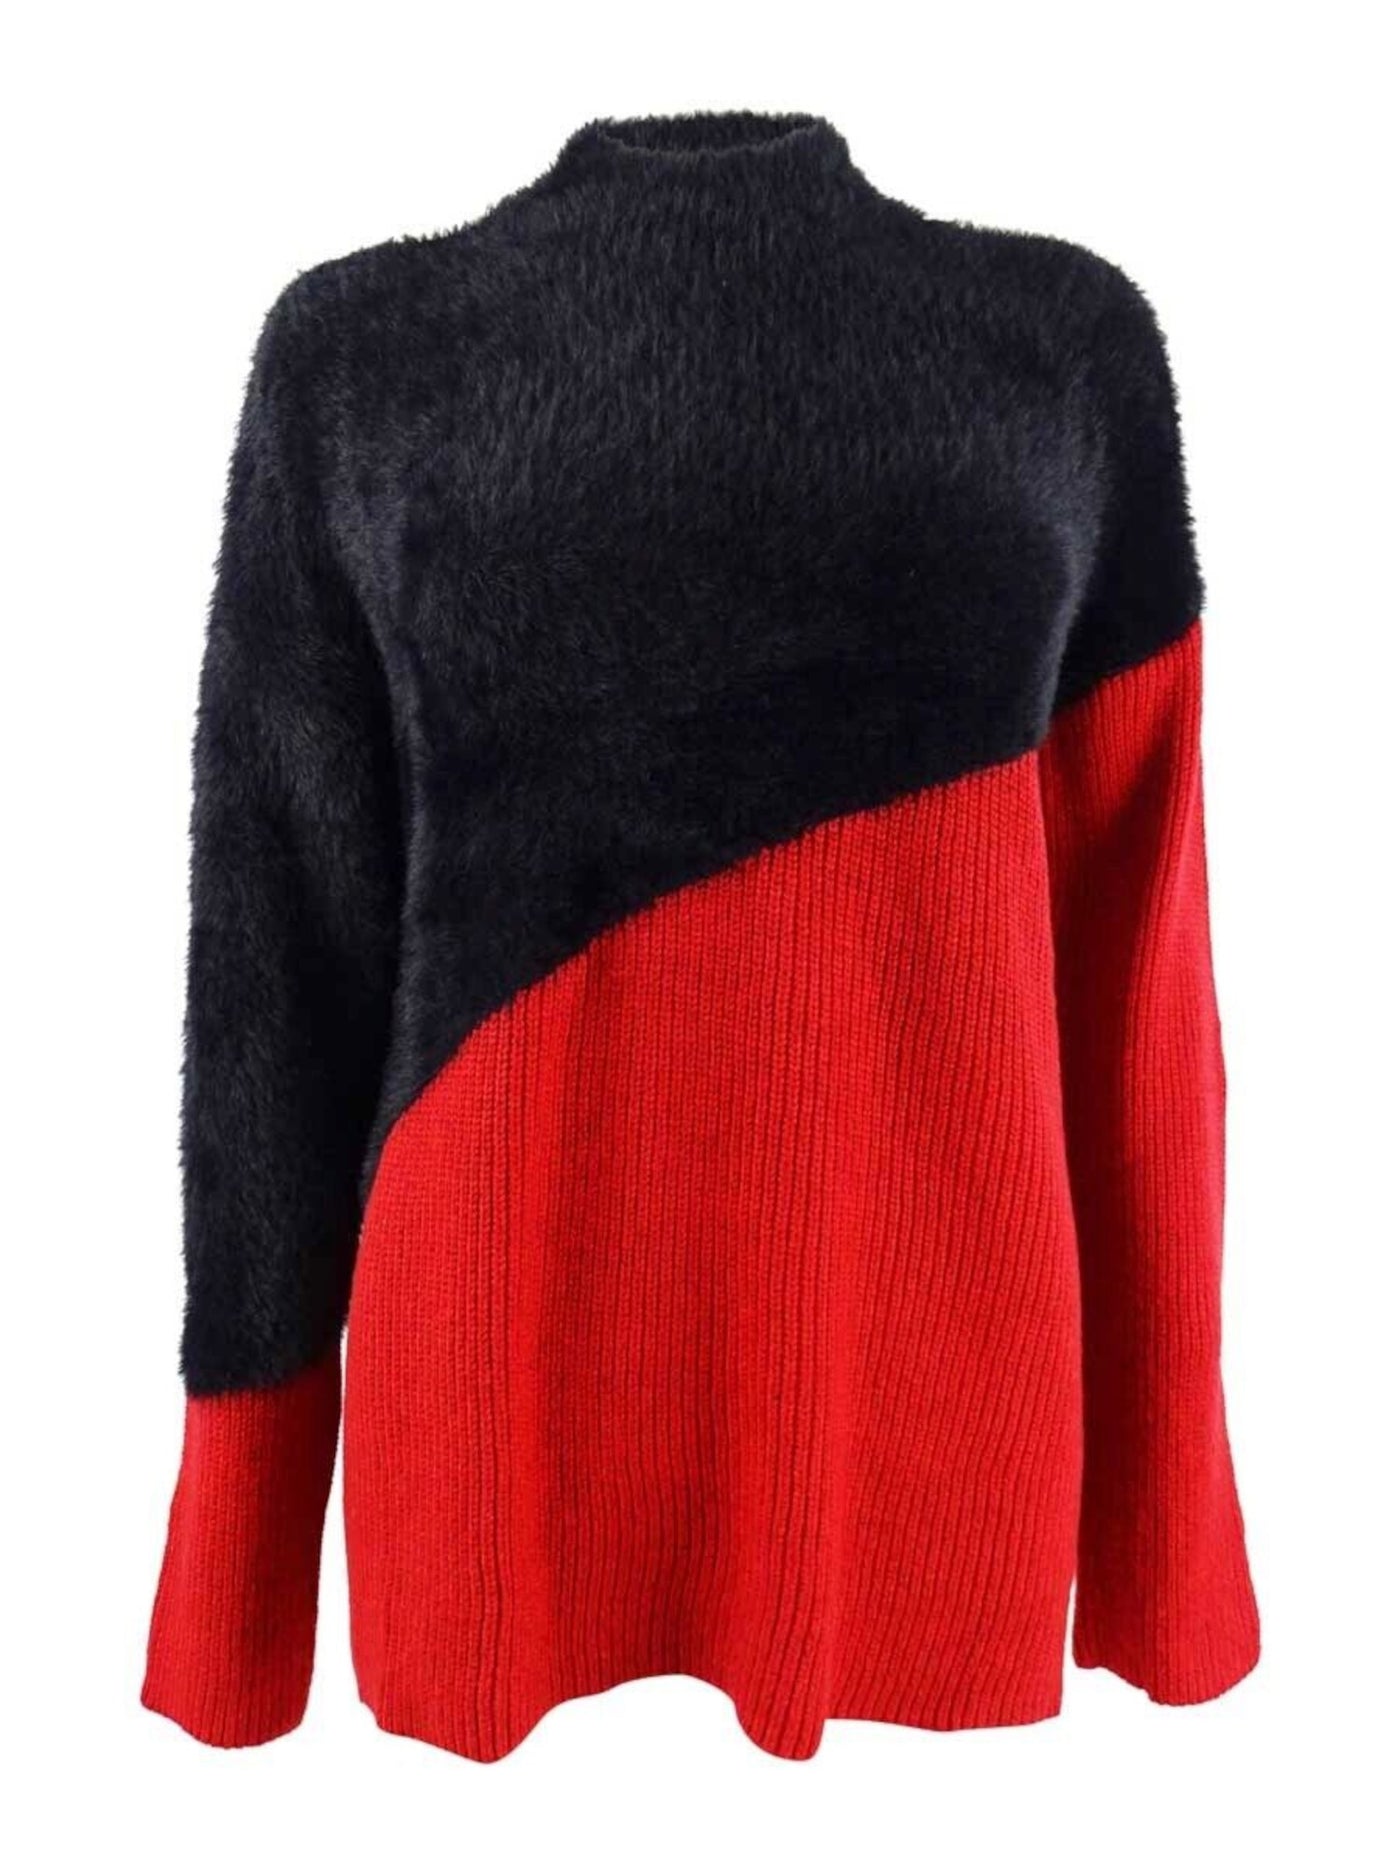 VINCE CAMUTO Womens Red Textured Ribbed Long Sleeve Mock Neck Wear To Work Sweater L